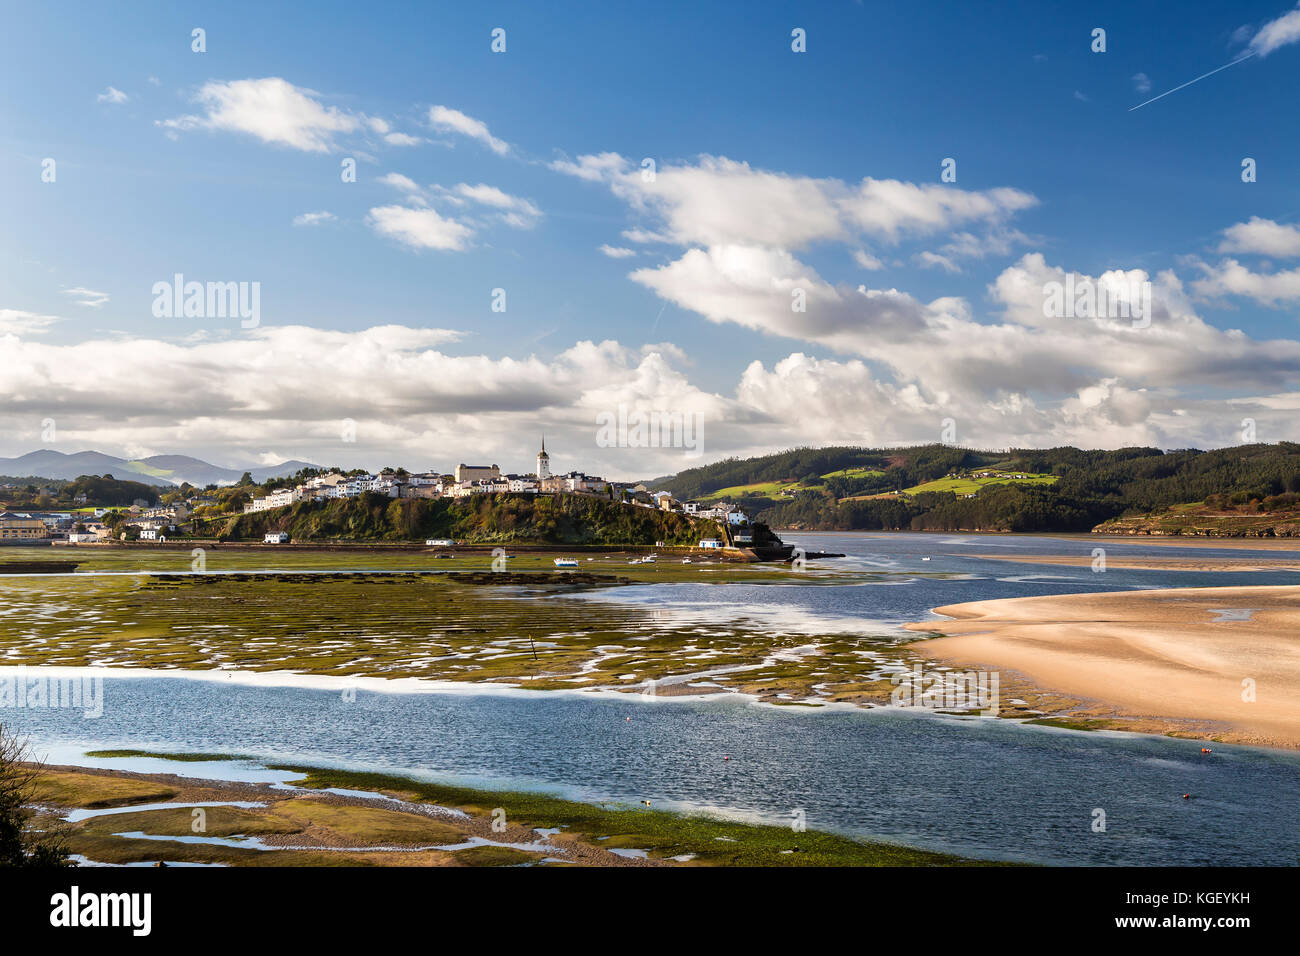 Fishing village on a river a sunny day with a few clouds Stock Photo